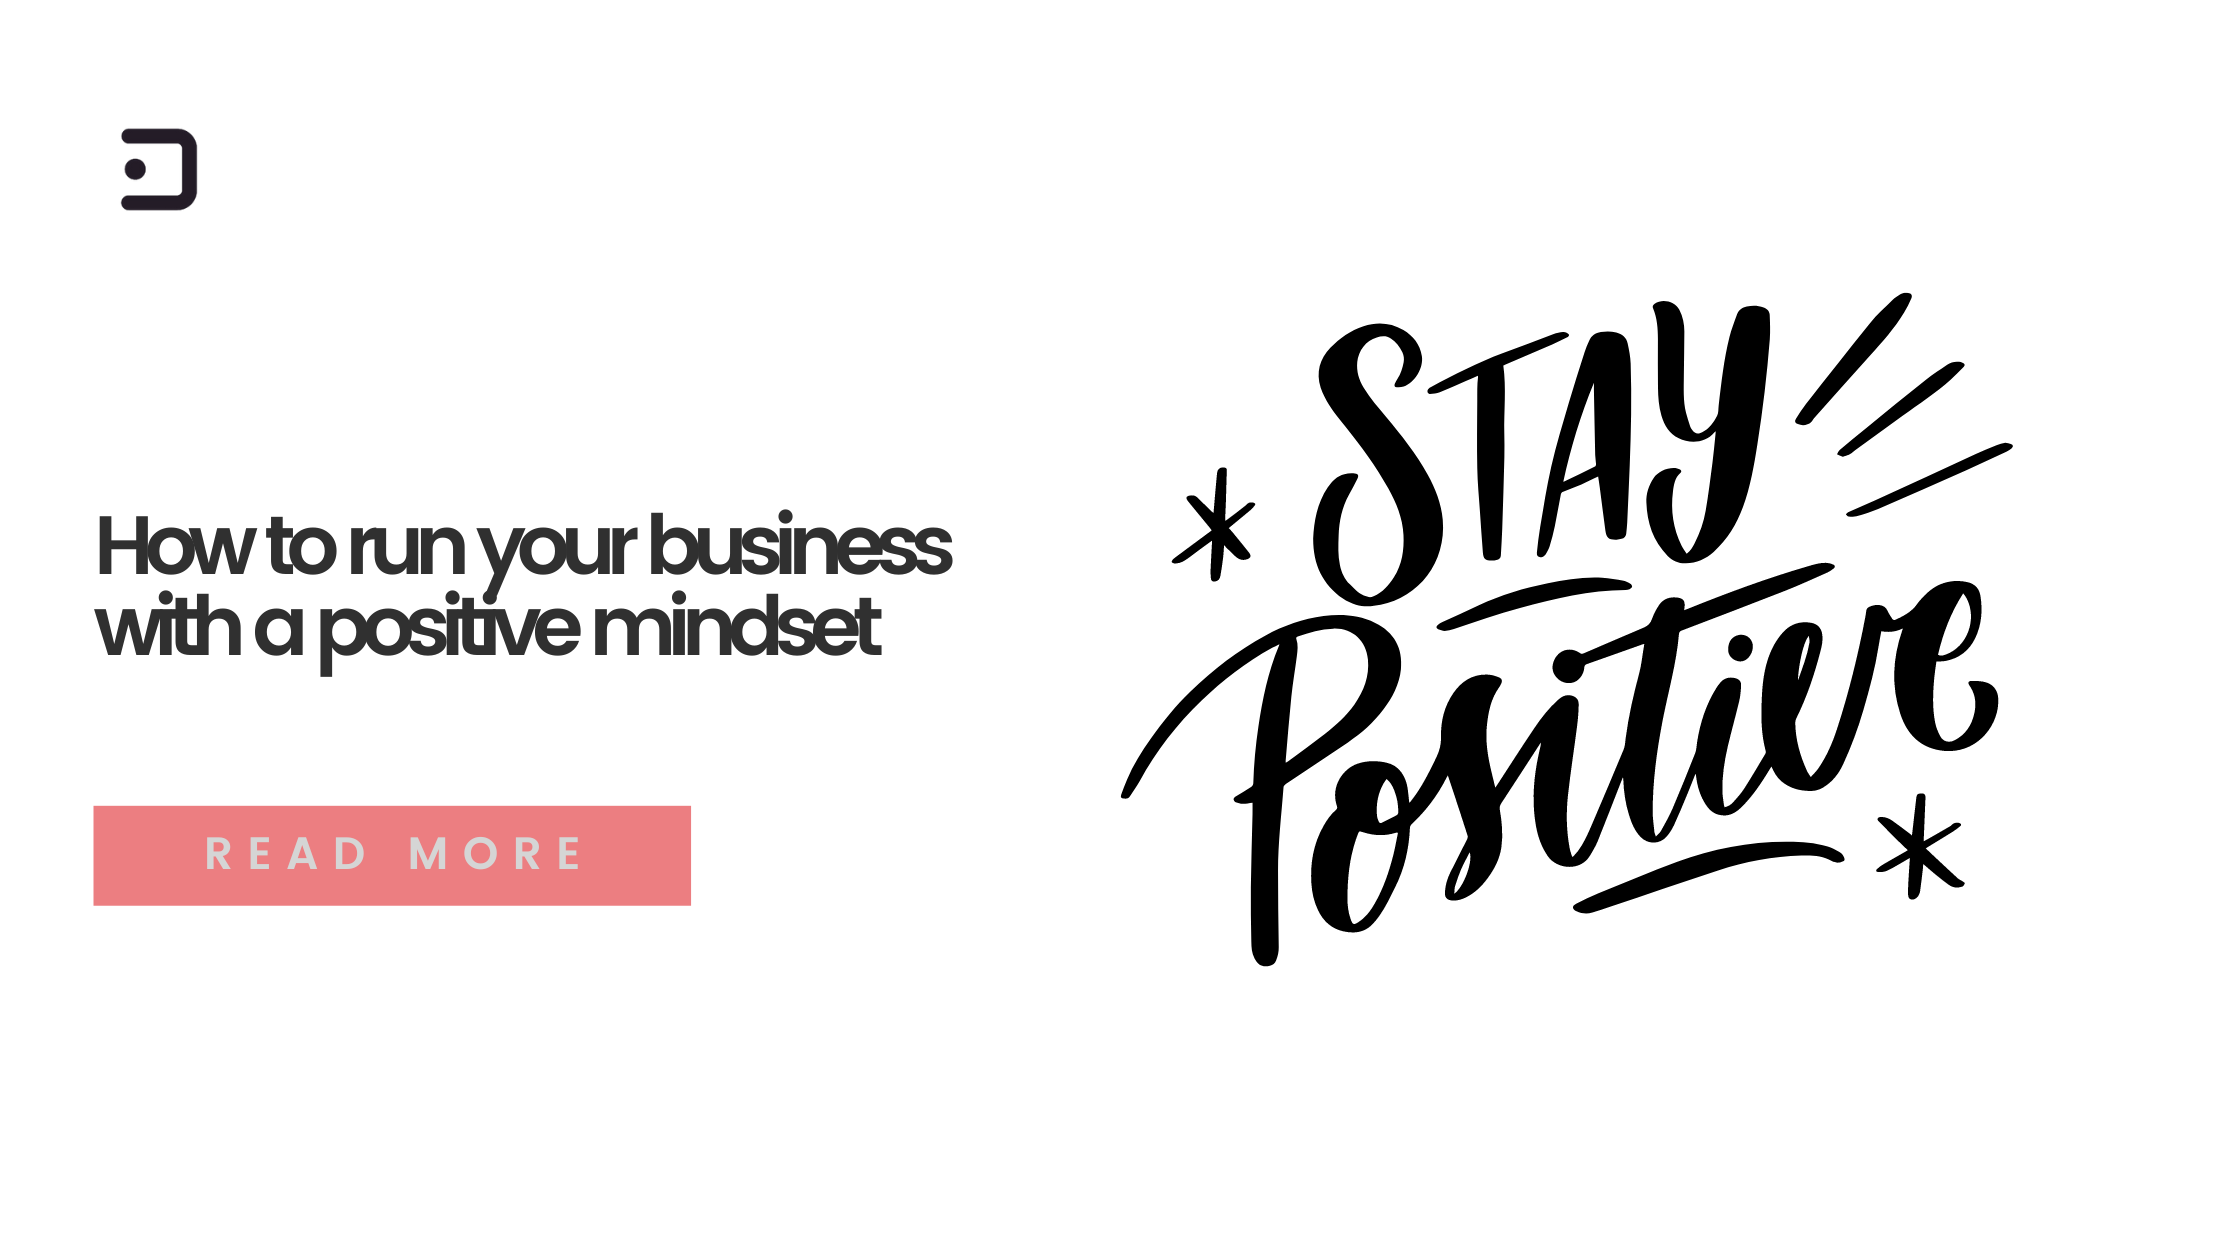 How to run your business with a positive mindset - Dukka